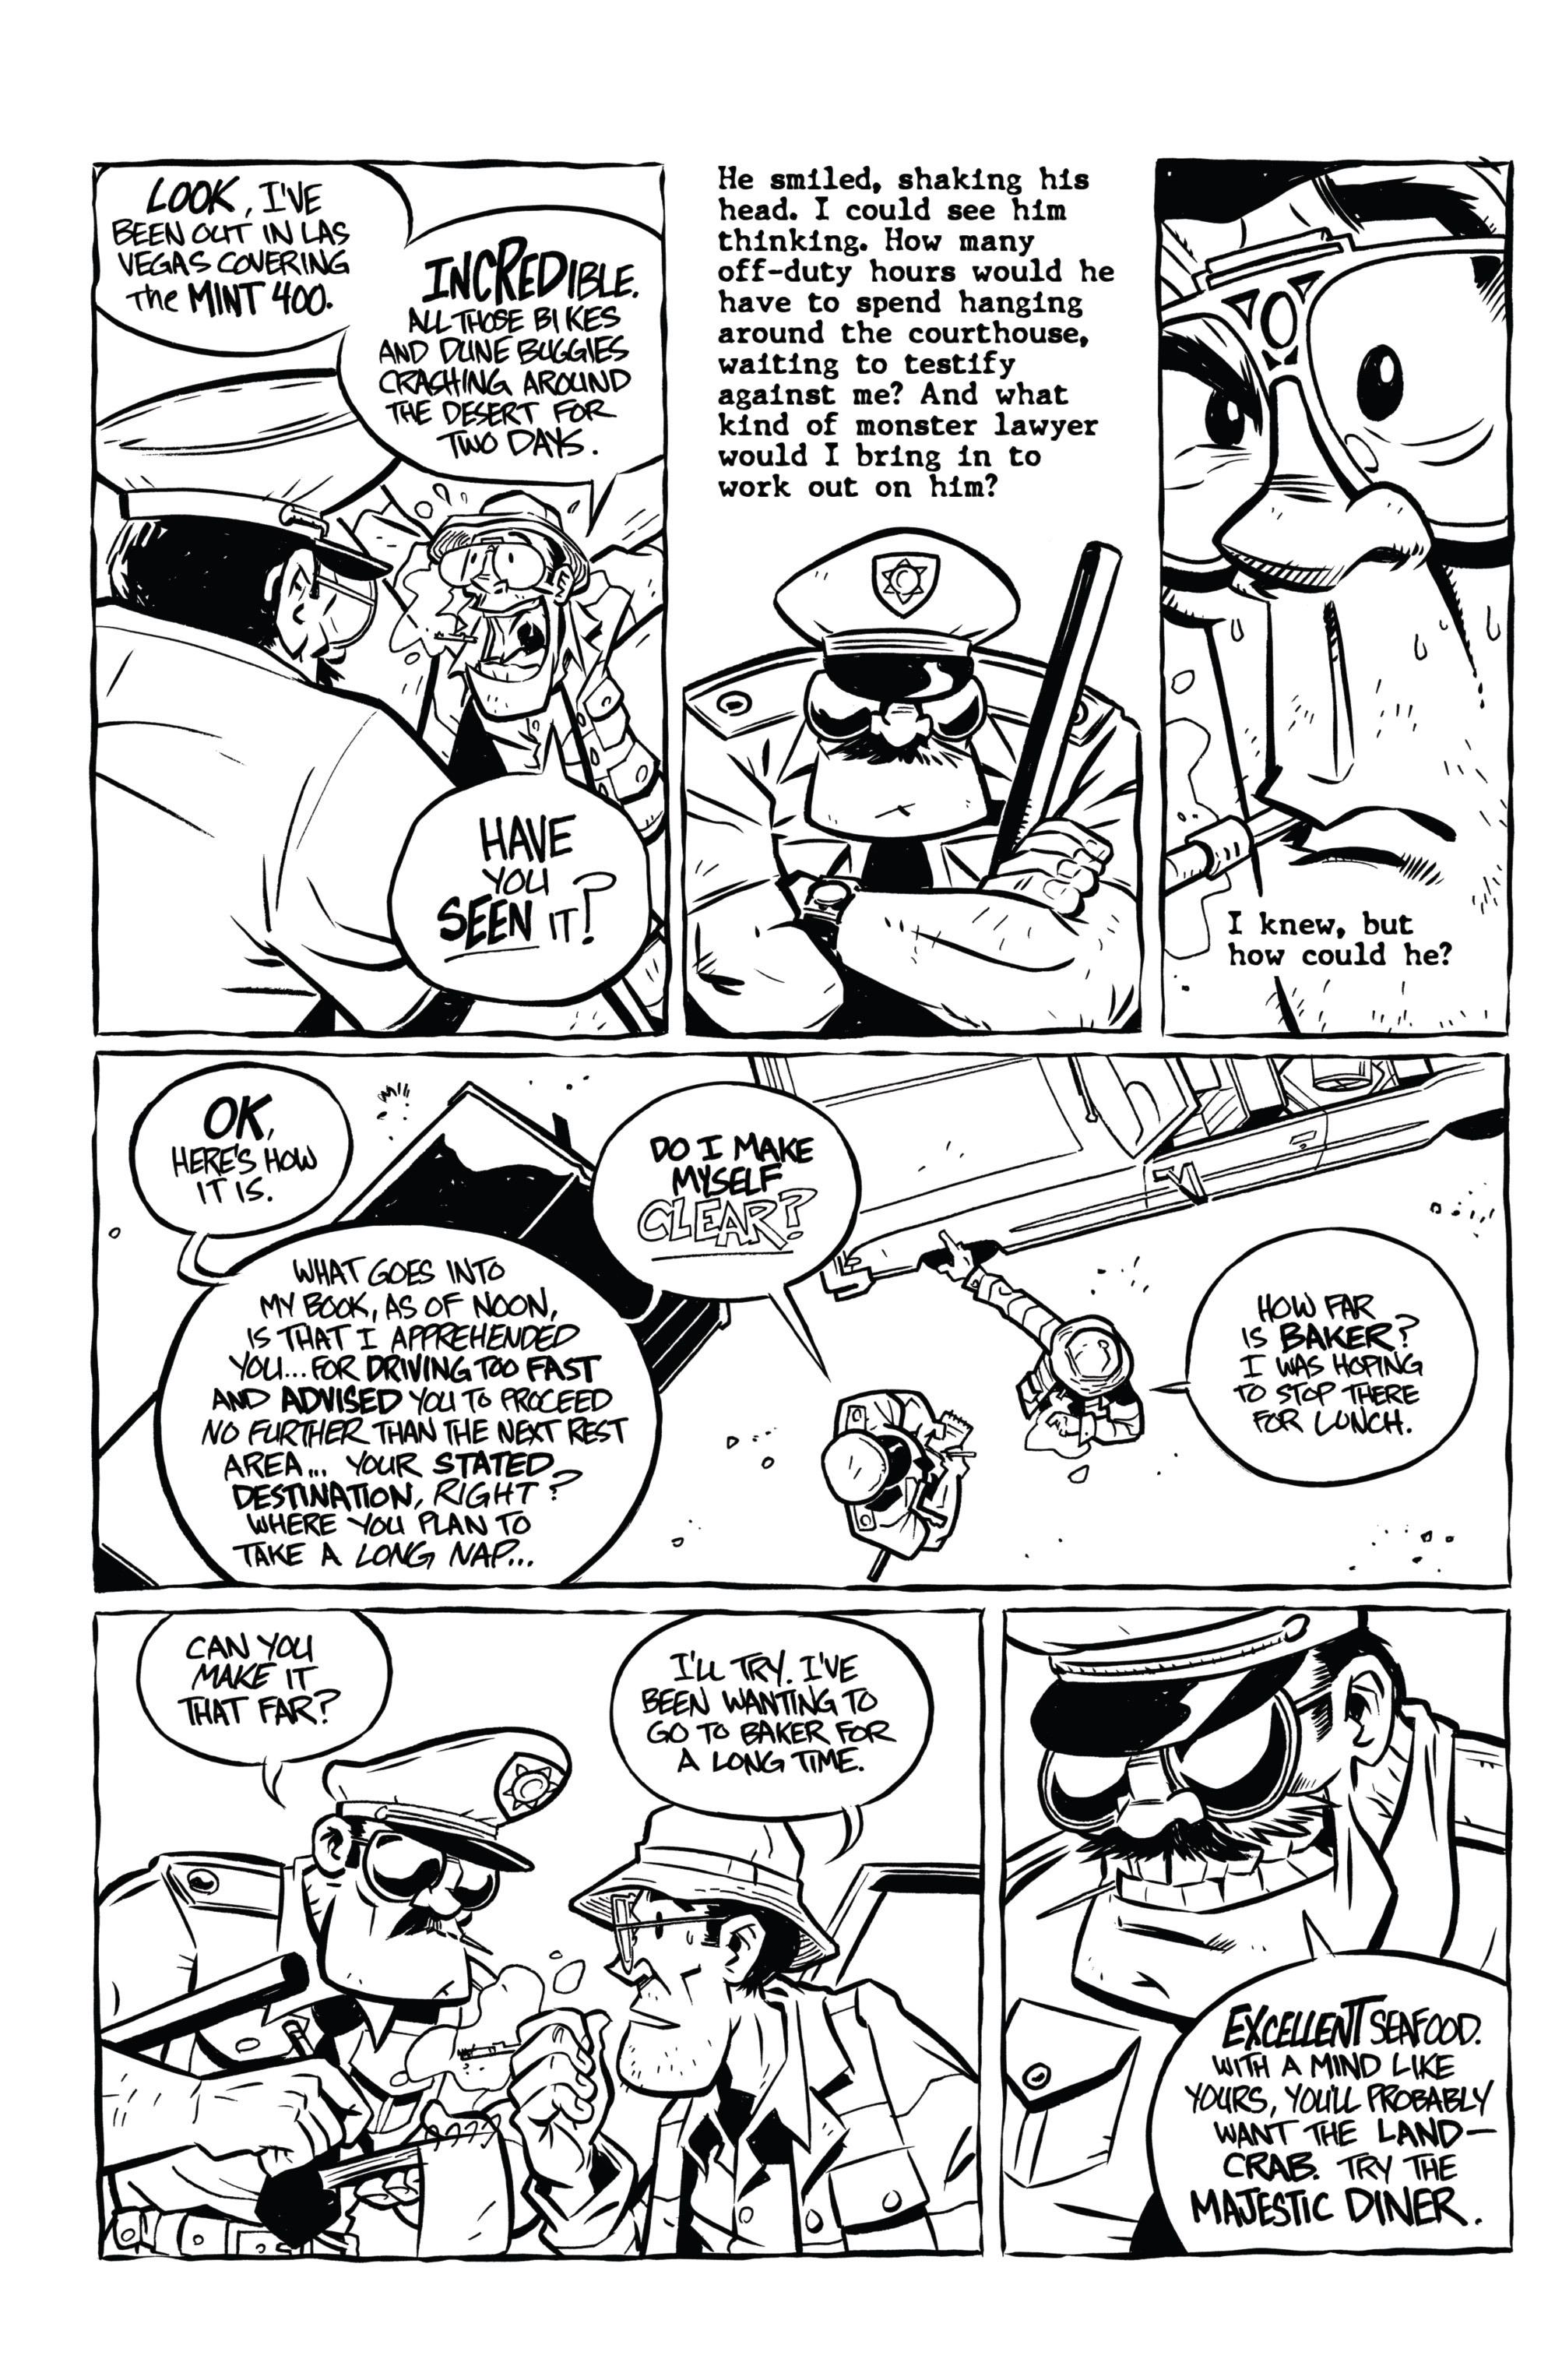 Read online Hunter S. Thompson's Fear and Loathing in Las Vegas comic -  Issue #3 - 9